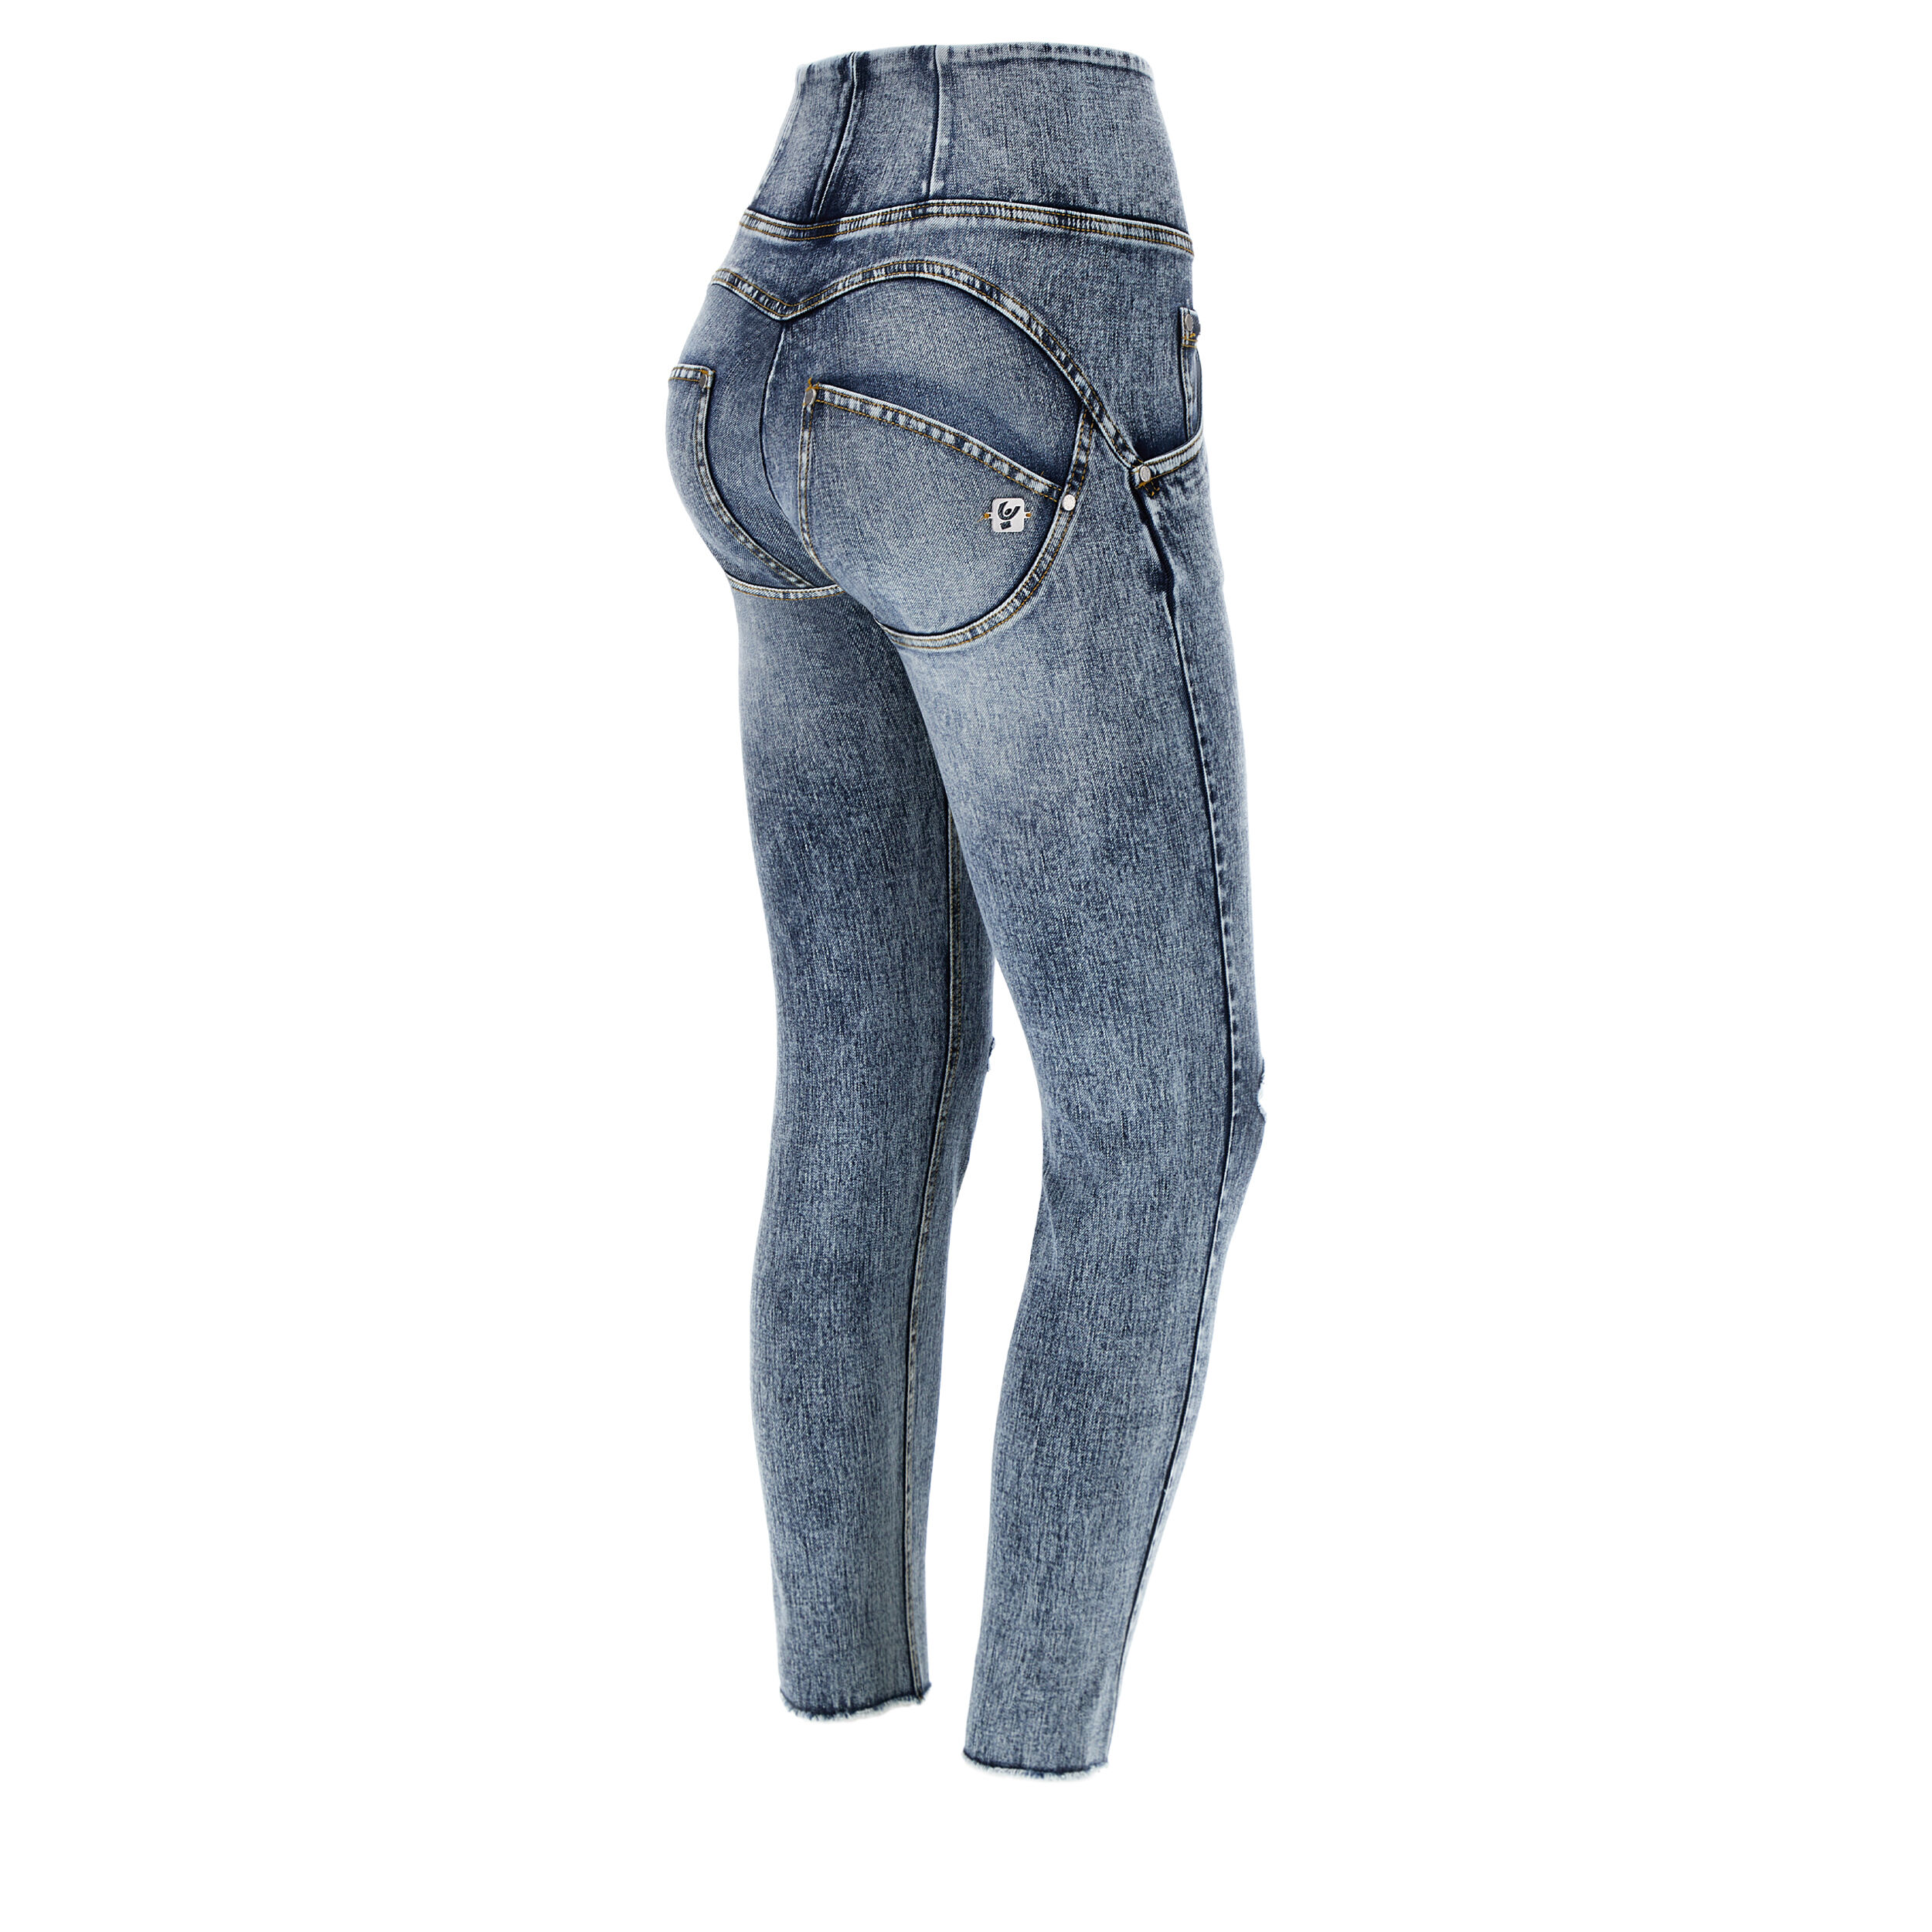 Freddy Jeans push up WR.UP® 7/8 superskinny denim effetto marble wash Jeans Slavato-Cuciture Gialle Donna Medium